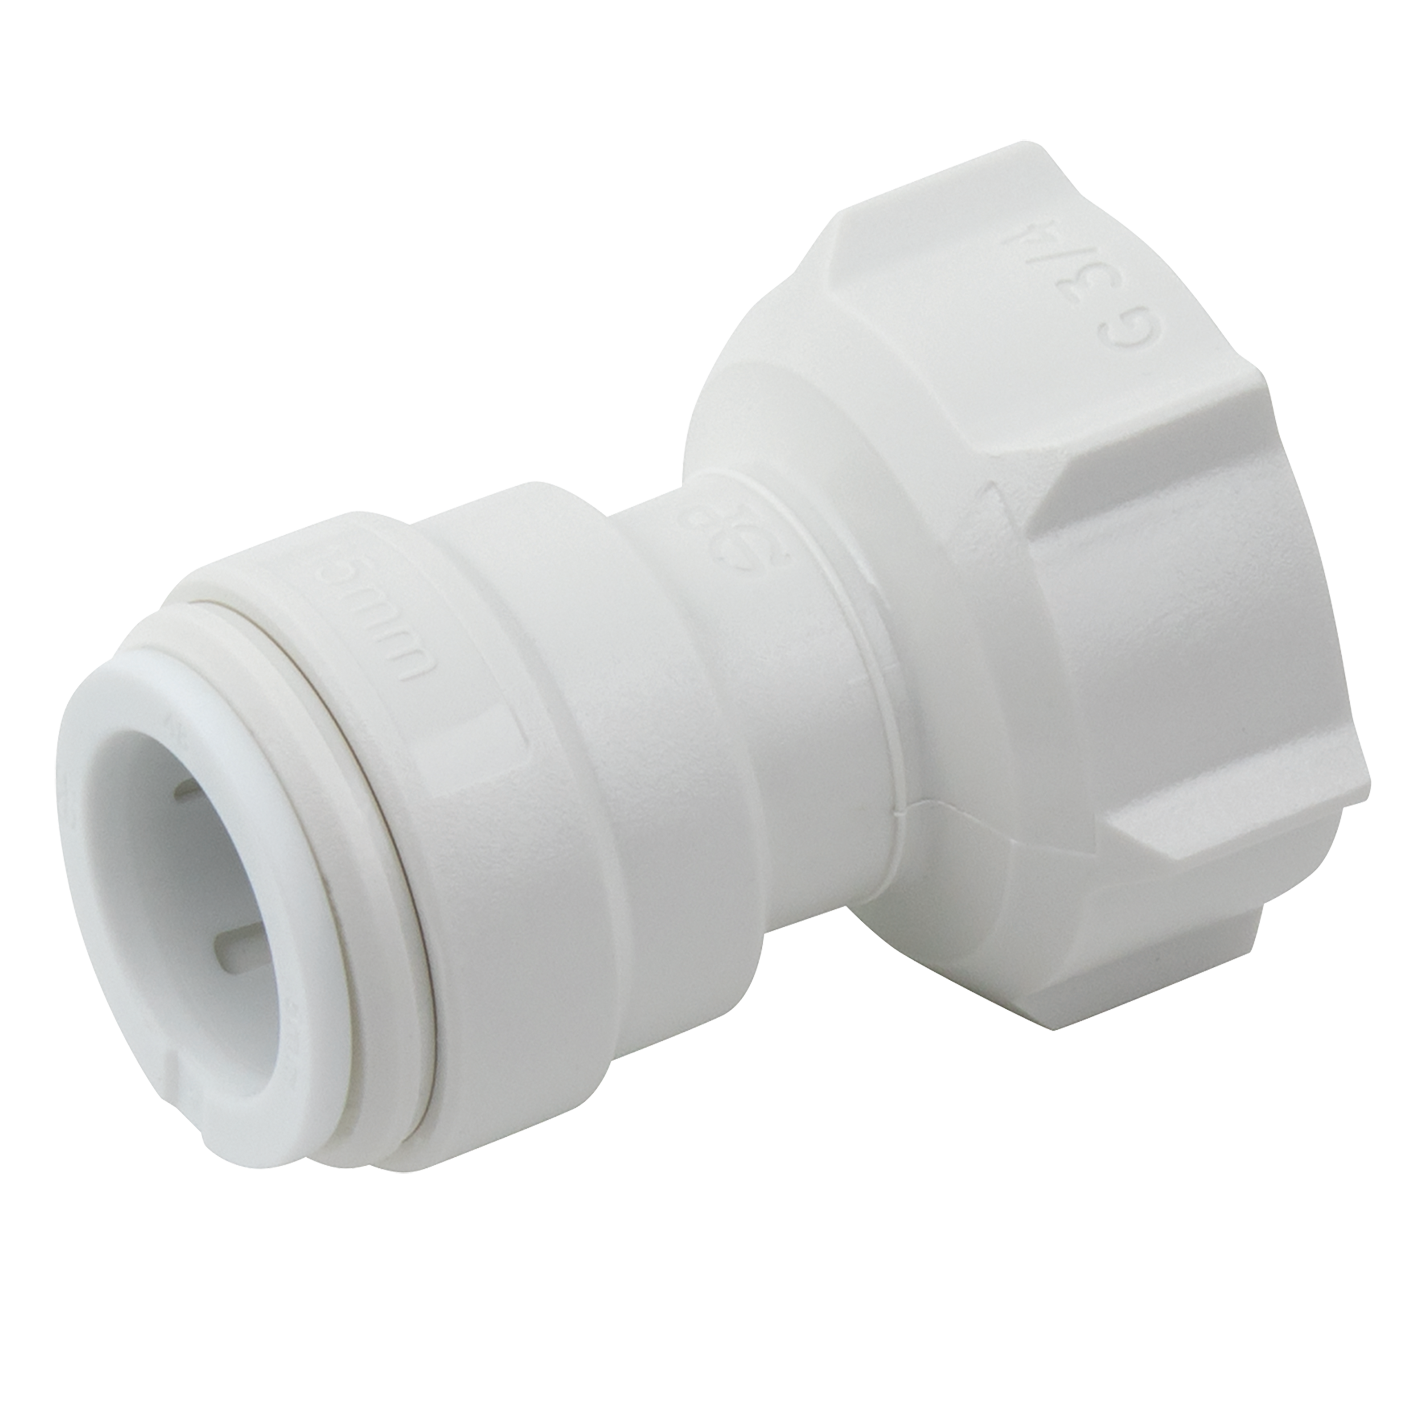 22 X 3/4" FEMALE COUPLER/TAP CONNECTOR